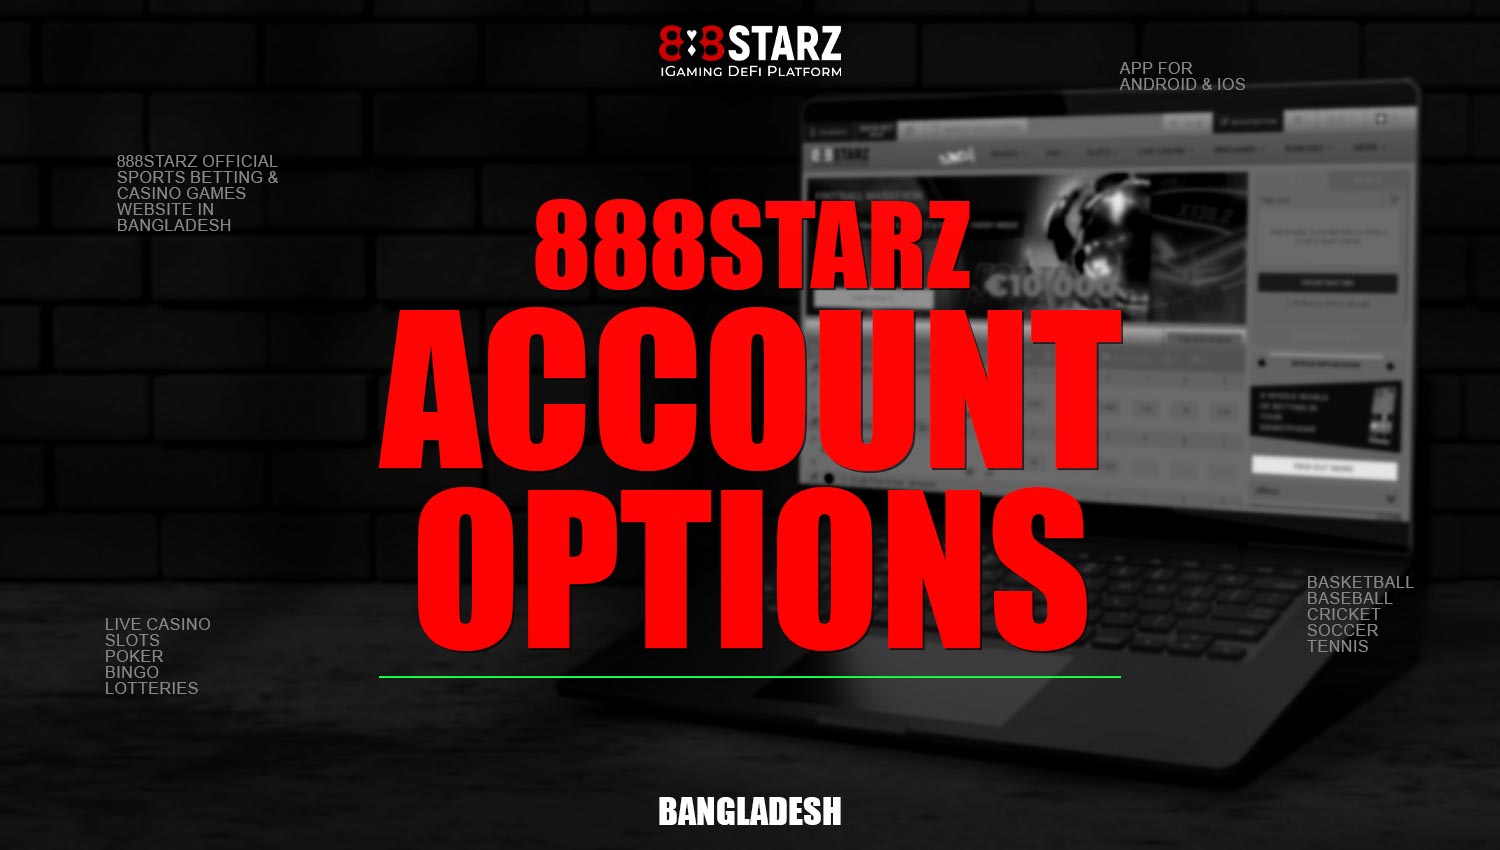 Account features on the 888Starz platform.